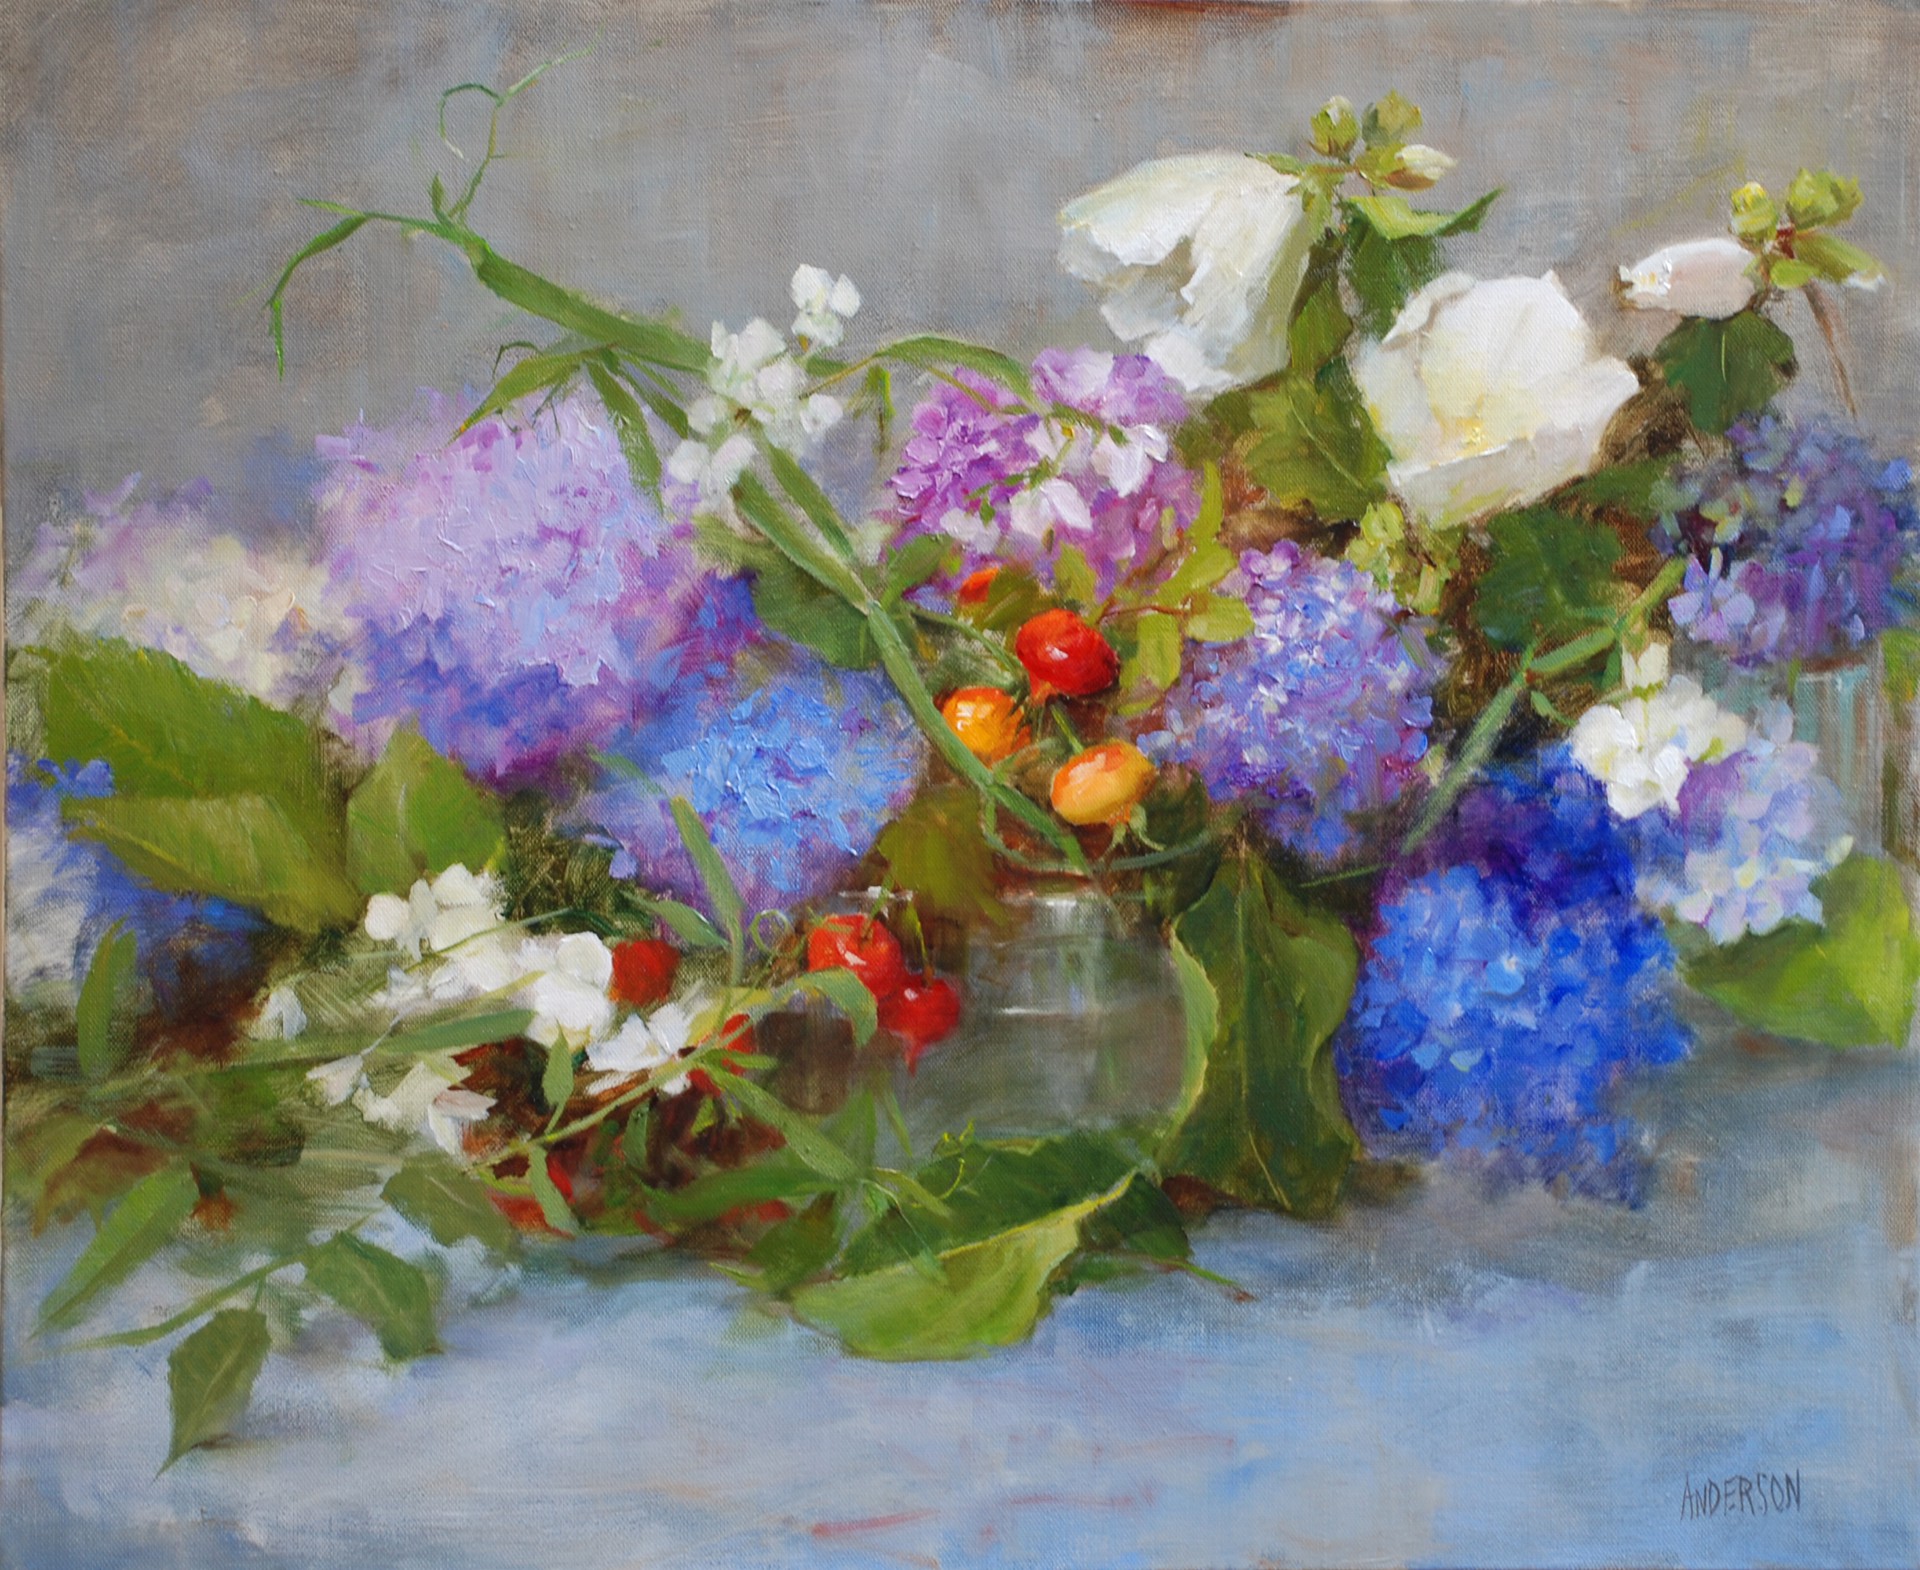 Blue Hydrangea with Rose Hips by Kathy Anderson